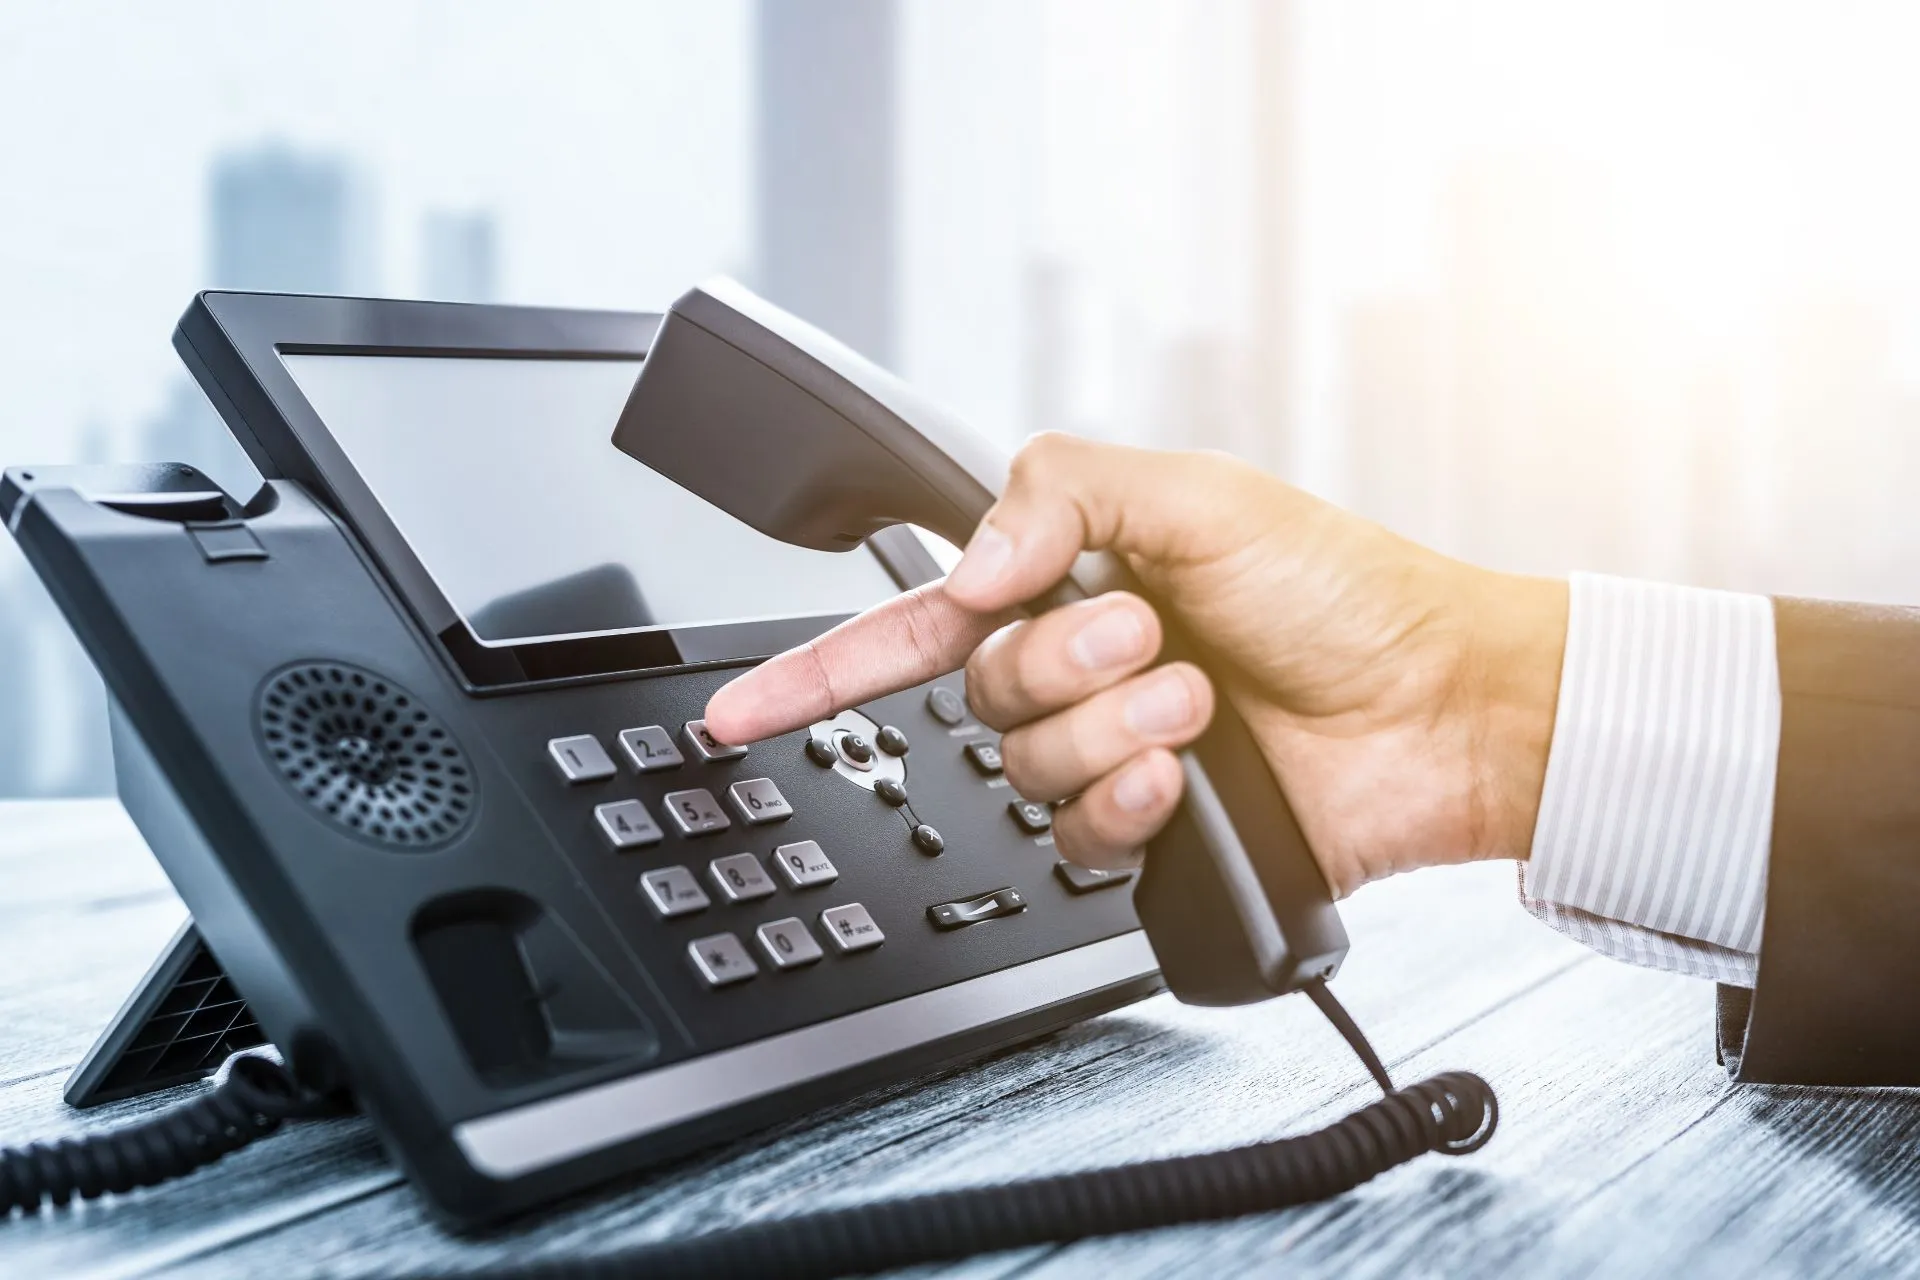 VoIP Phone Solution reduces cost and increases functionality